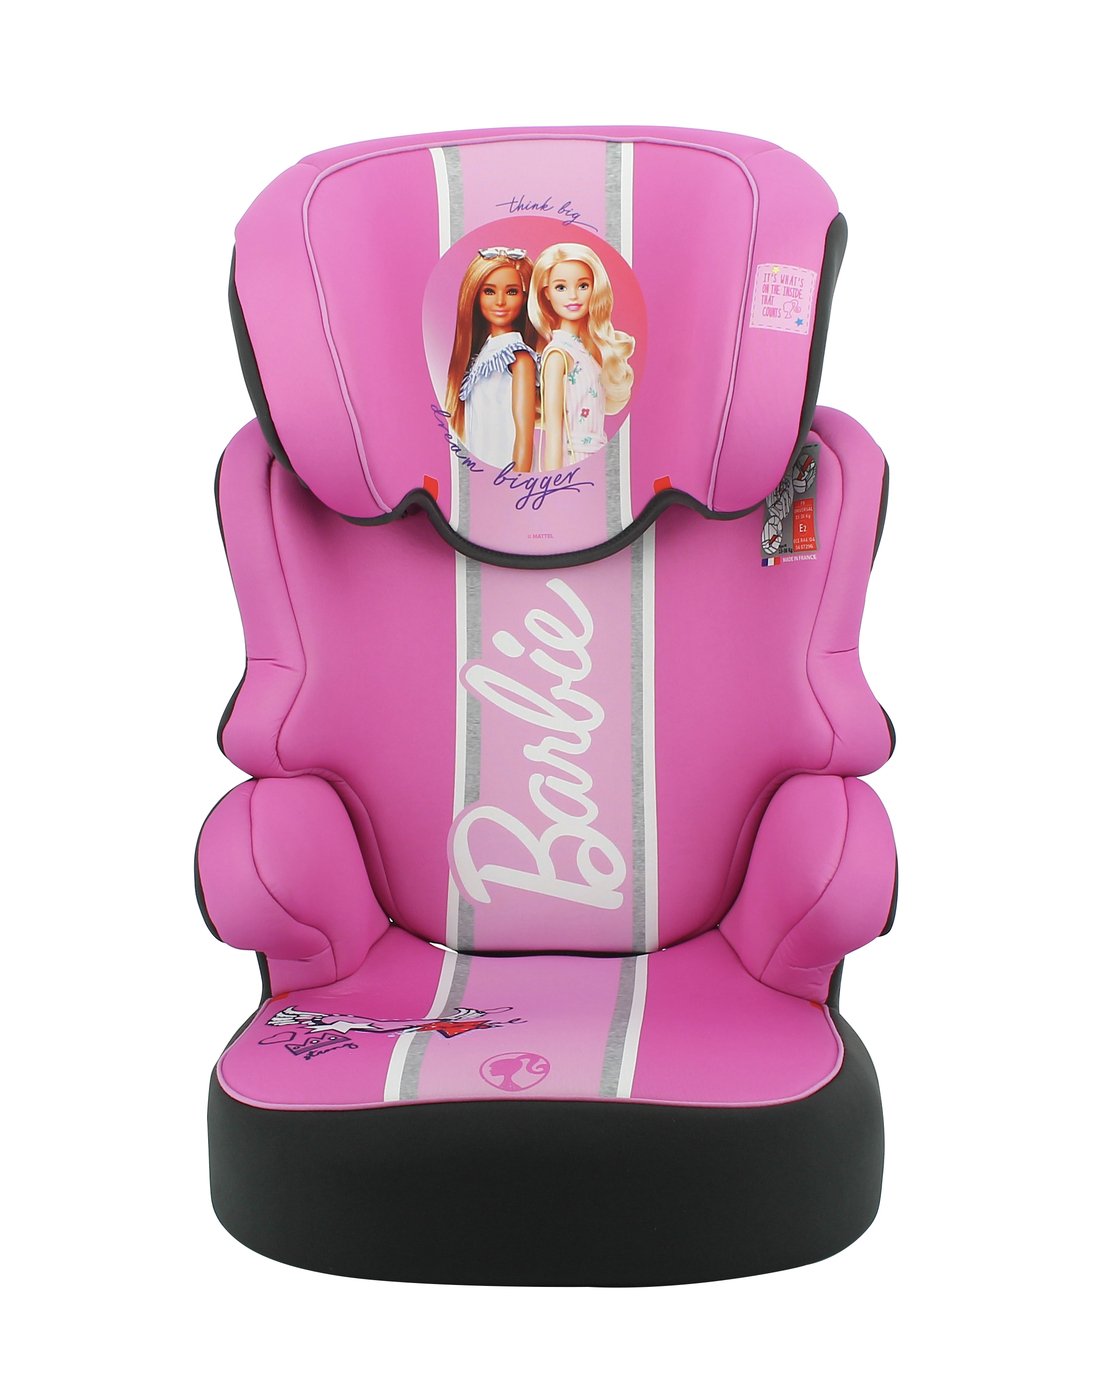 Barbie Befix SP Group 2 to 3 Booster Car Seat Review